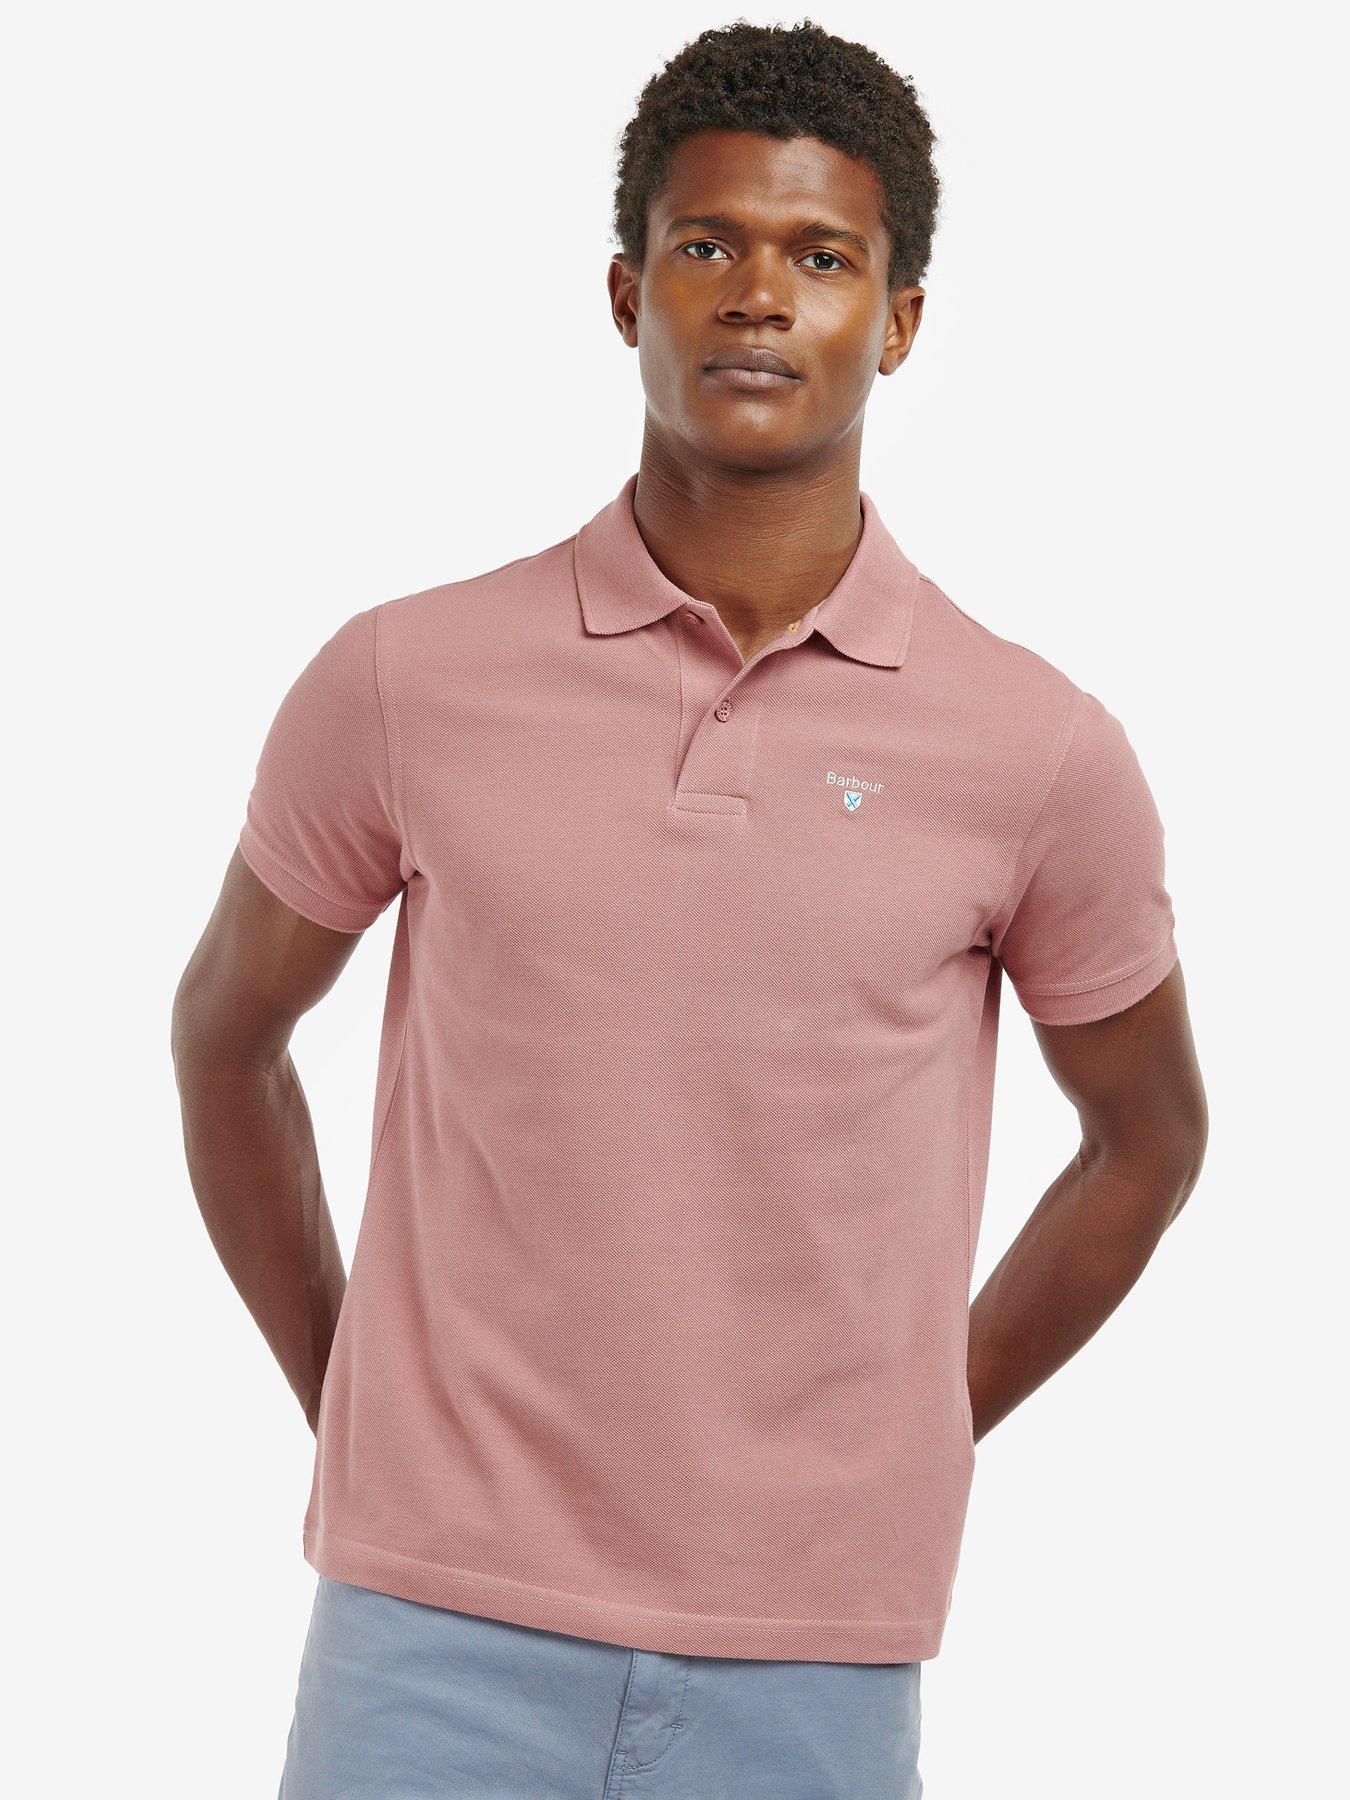 Barbour Sports Polo Shirt - Pink